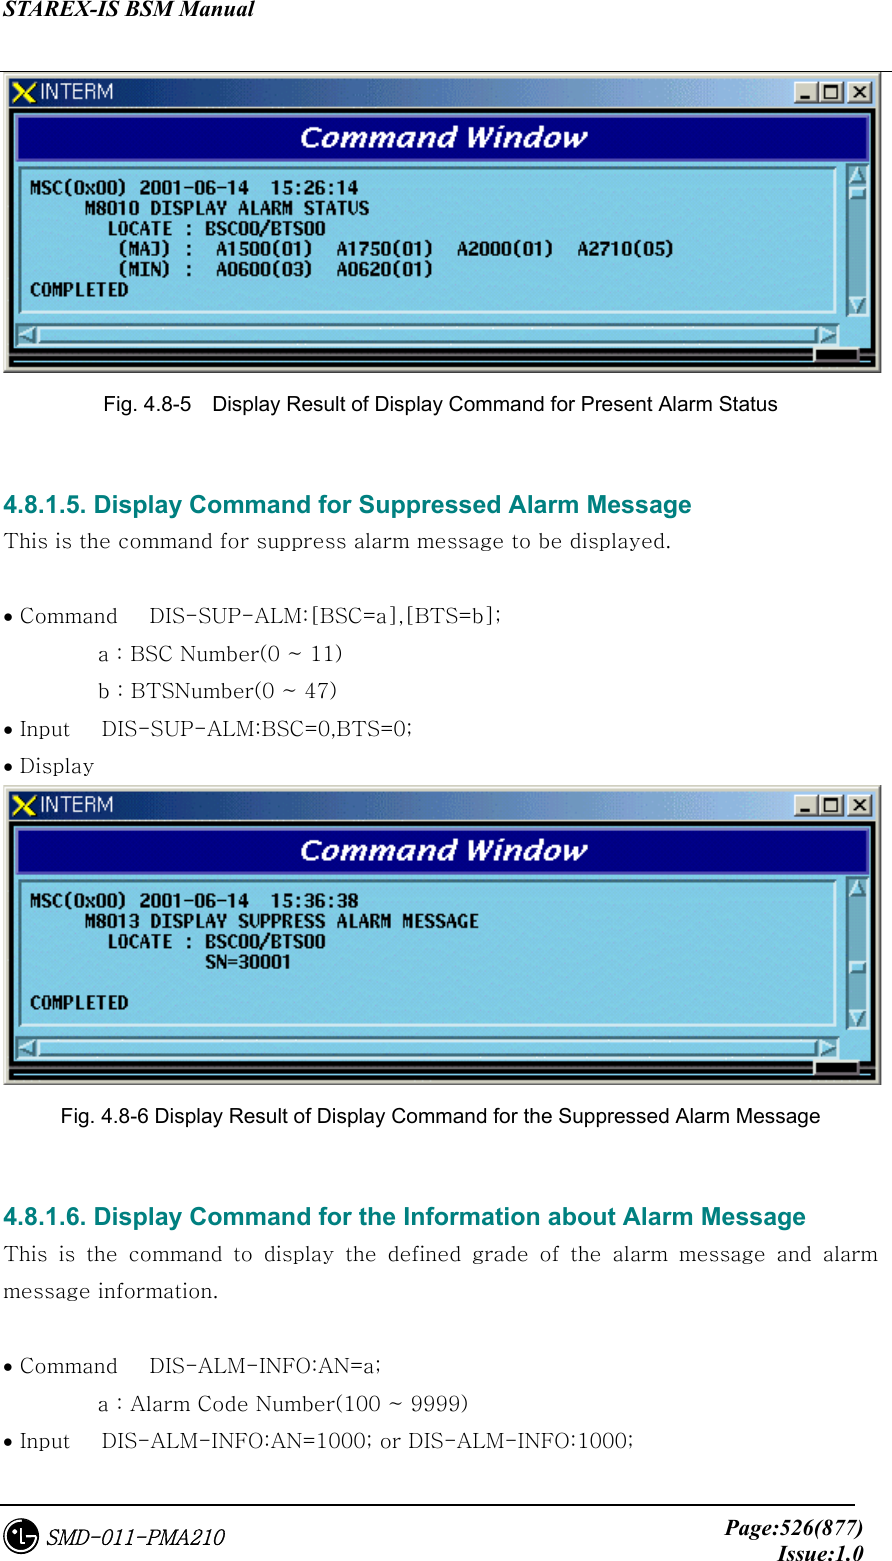 STAREX-IS BSM Manual     Page:526(877)Issue:1.0SMD-011-PMA210  Fig. 4.8-5    Display Result of Display Command for Present Alarm Status  4.8.1.5. Display Command for Suppressed Alarm Message This is the command for suppress alarm message to be displayed.   • Command   DIS-SUP-ALM:[BSC=a],[BTS=b];          a : BSC Number(0 ~ 11)          b : BTSNumber(0 ~ 47) • Input   DIS-SUP-ALM:BSC=0,BTS=0; • Display  Fig. 4.8-6 Display Result of Display Command for the Suppressed Alarm Message  4.8.1.6. Display Command for the Information about Alarm Message This  is  the  command  to  display  the  defined  grade  of  the  alarm  message and alarm message information.  • Command   DIS-ALM-INFO:AN=a;           a : Alarm Code Number(100 ~ 9999) • Input   DIS-ALM-INFO:AN=1000; or DIS-ALM-INFO:1000; 